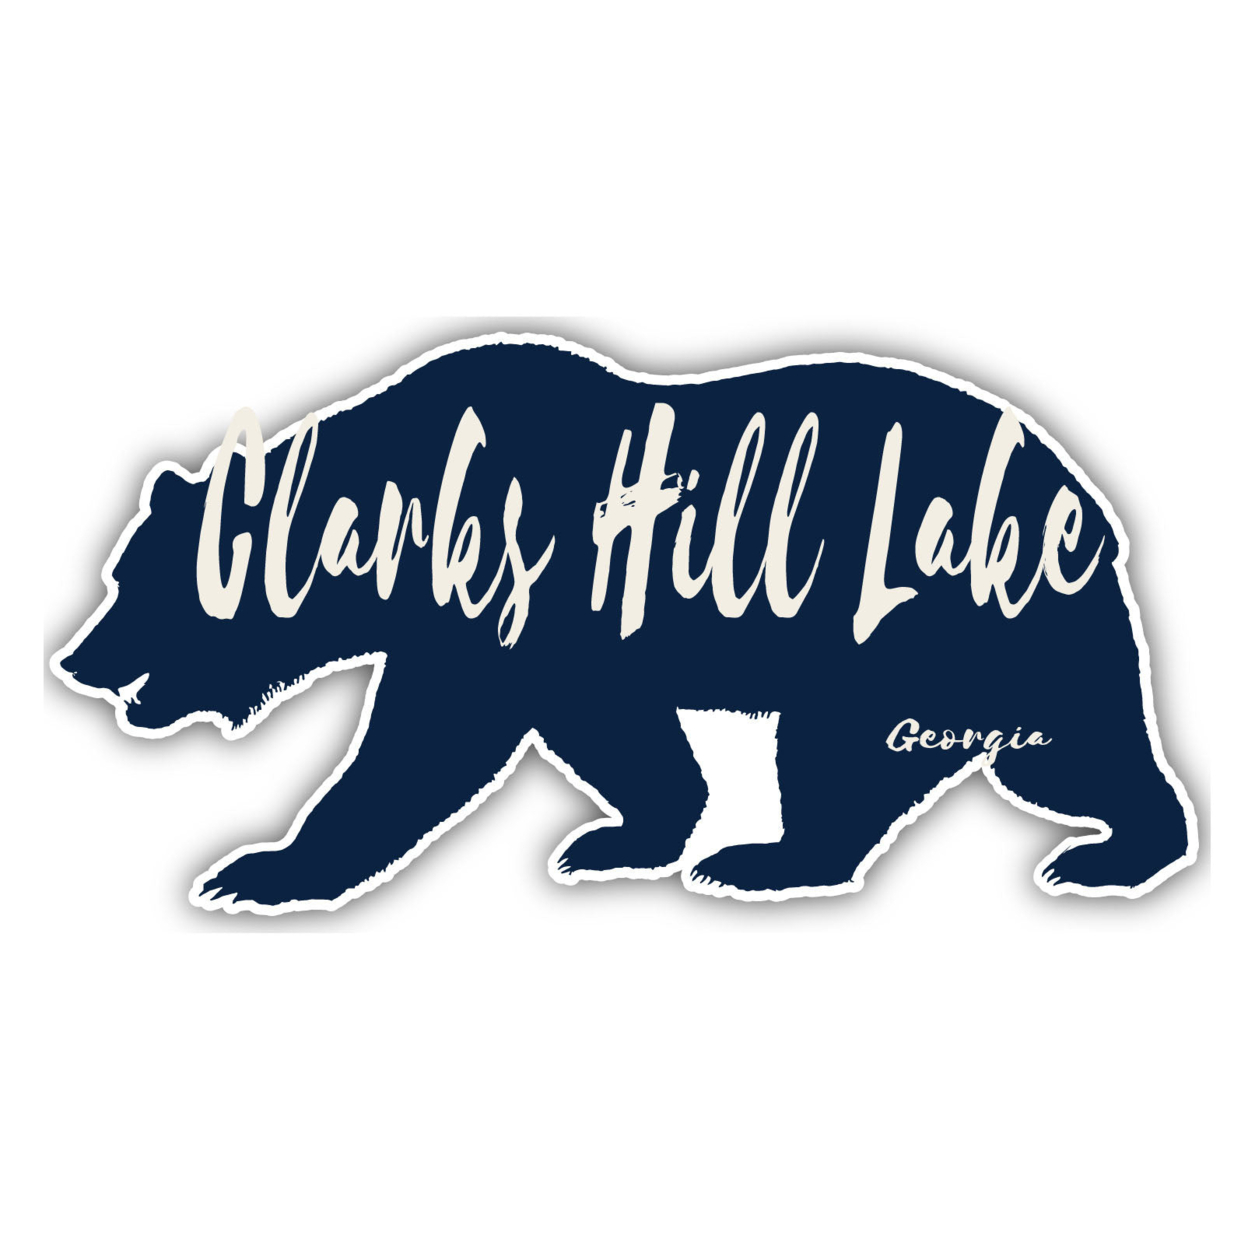 Clarks Hill Lake Georgia Souvenir Decorative Stickers (Choose Theme And Size) - 4-Pack, 6-Inch, Tent